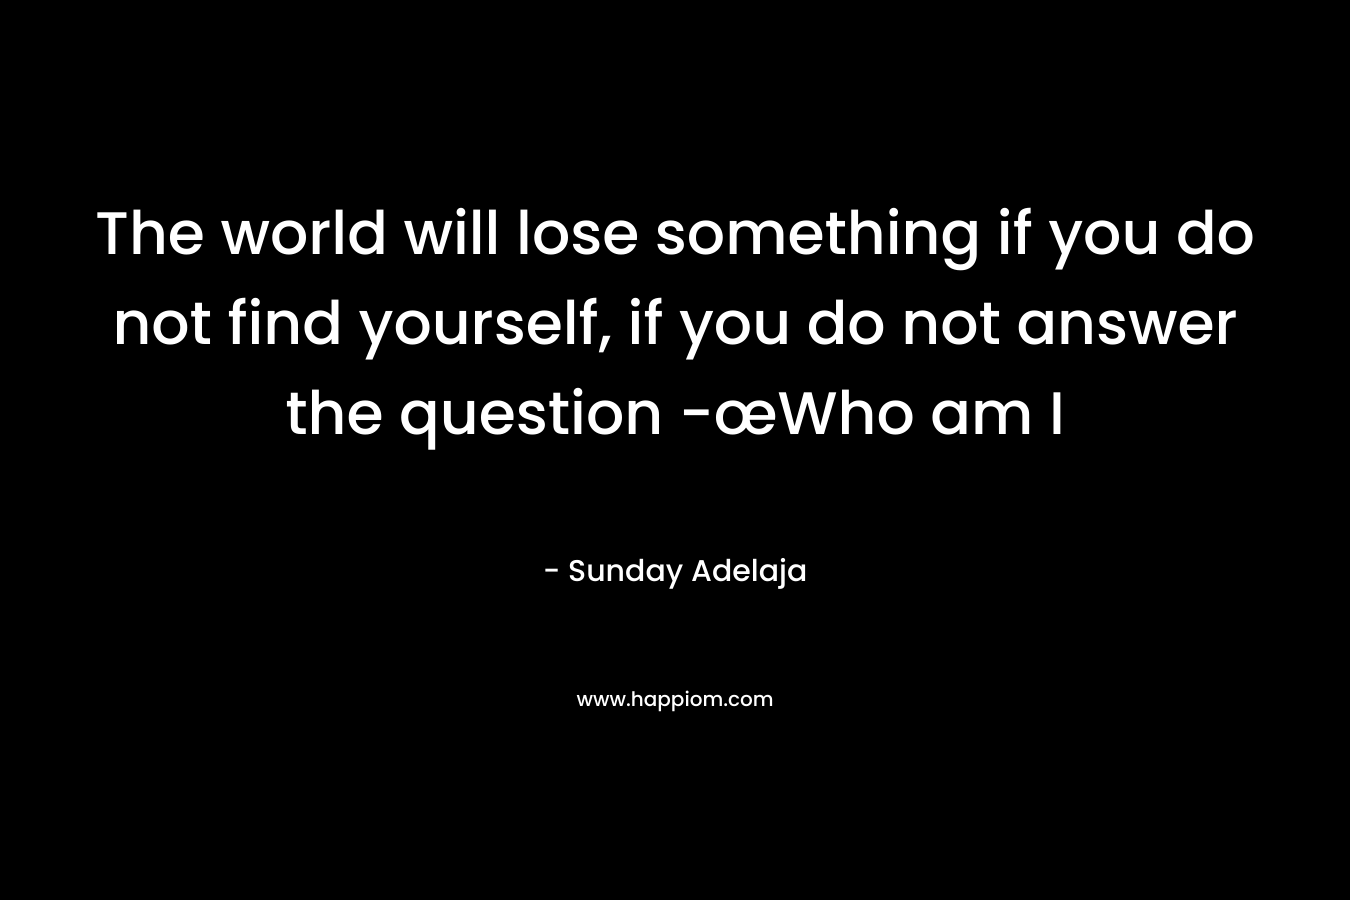 The world will lose something if you do not find yourself, if you do not answer the question -œWho am I